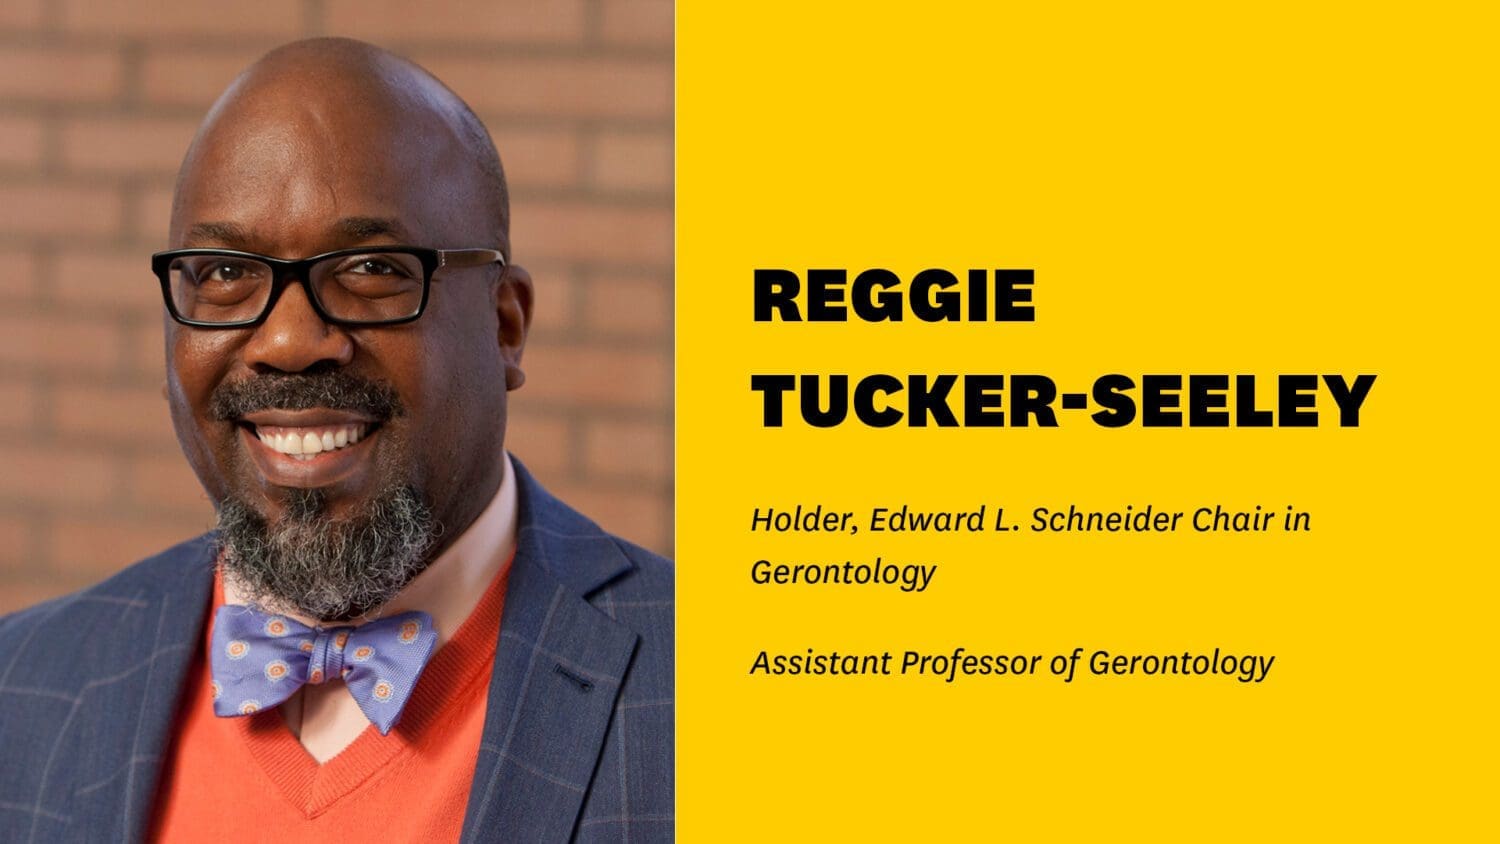 Reginald Tucker-Seeley portrait with name and titles